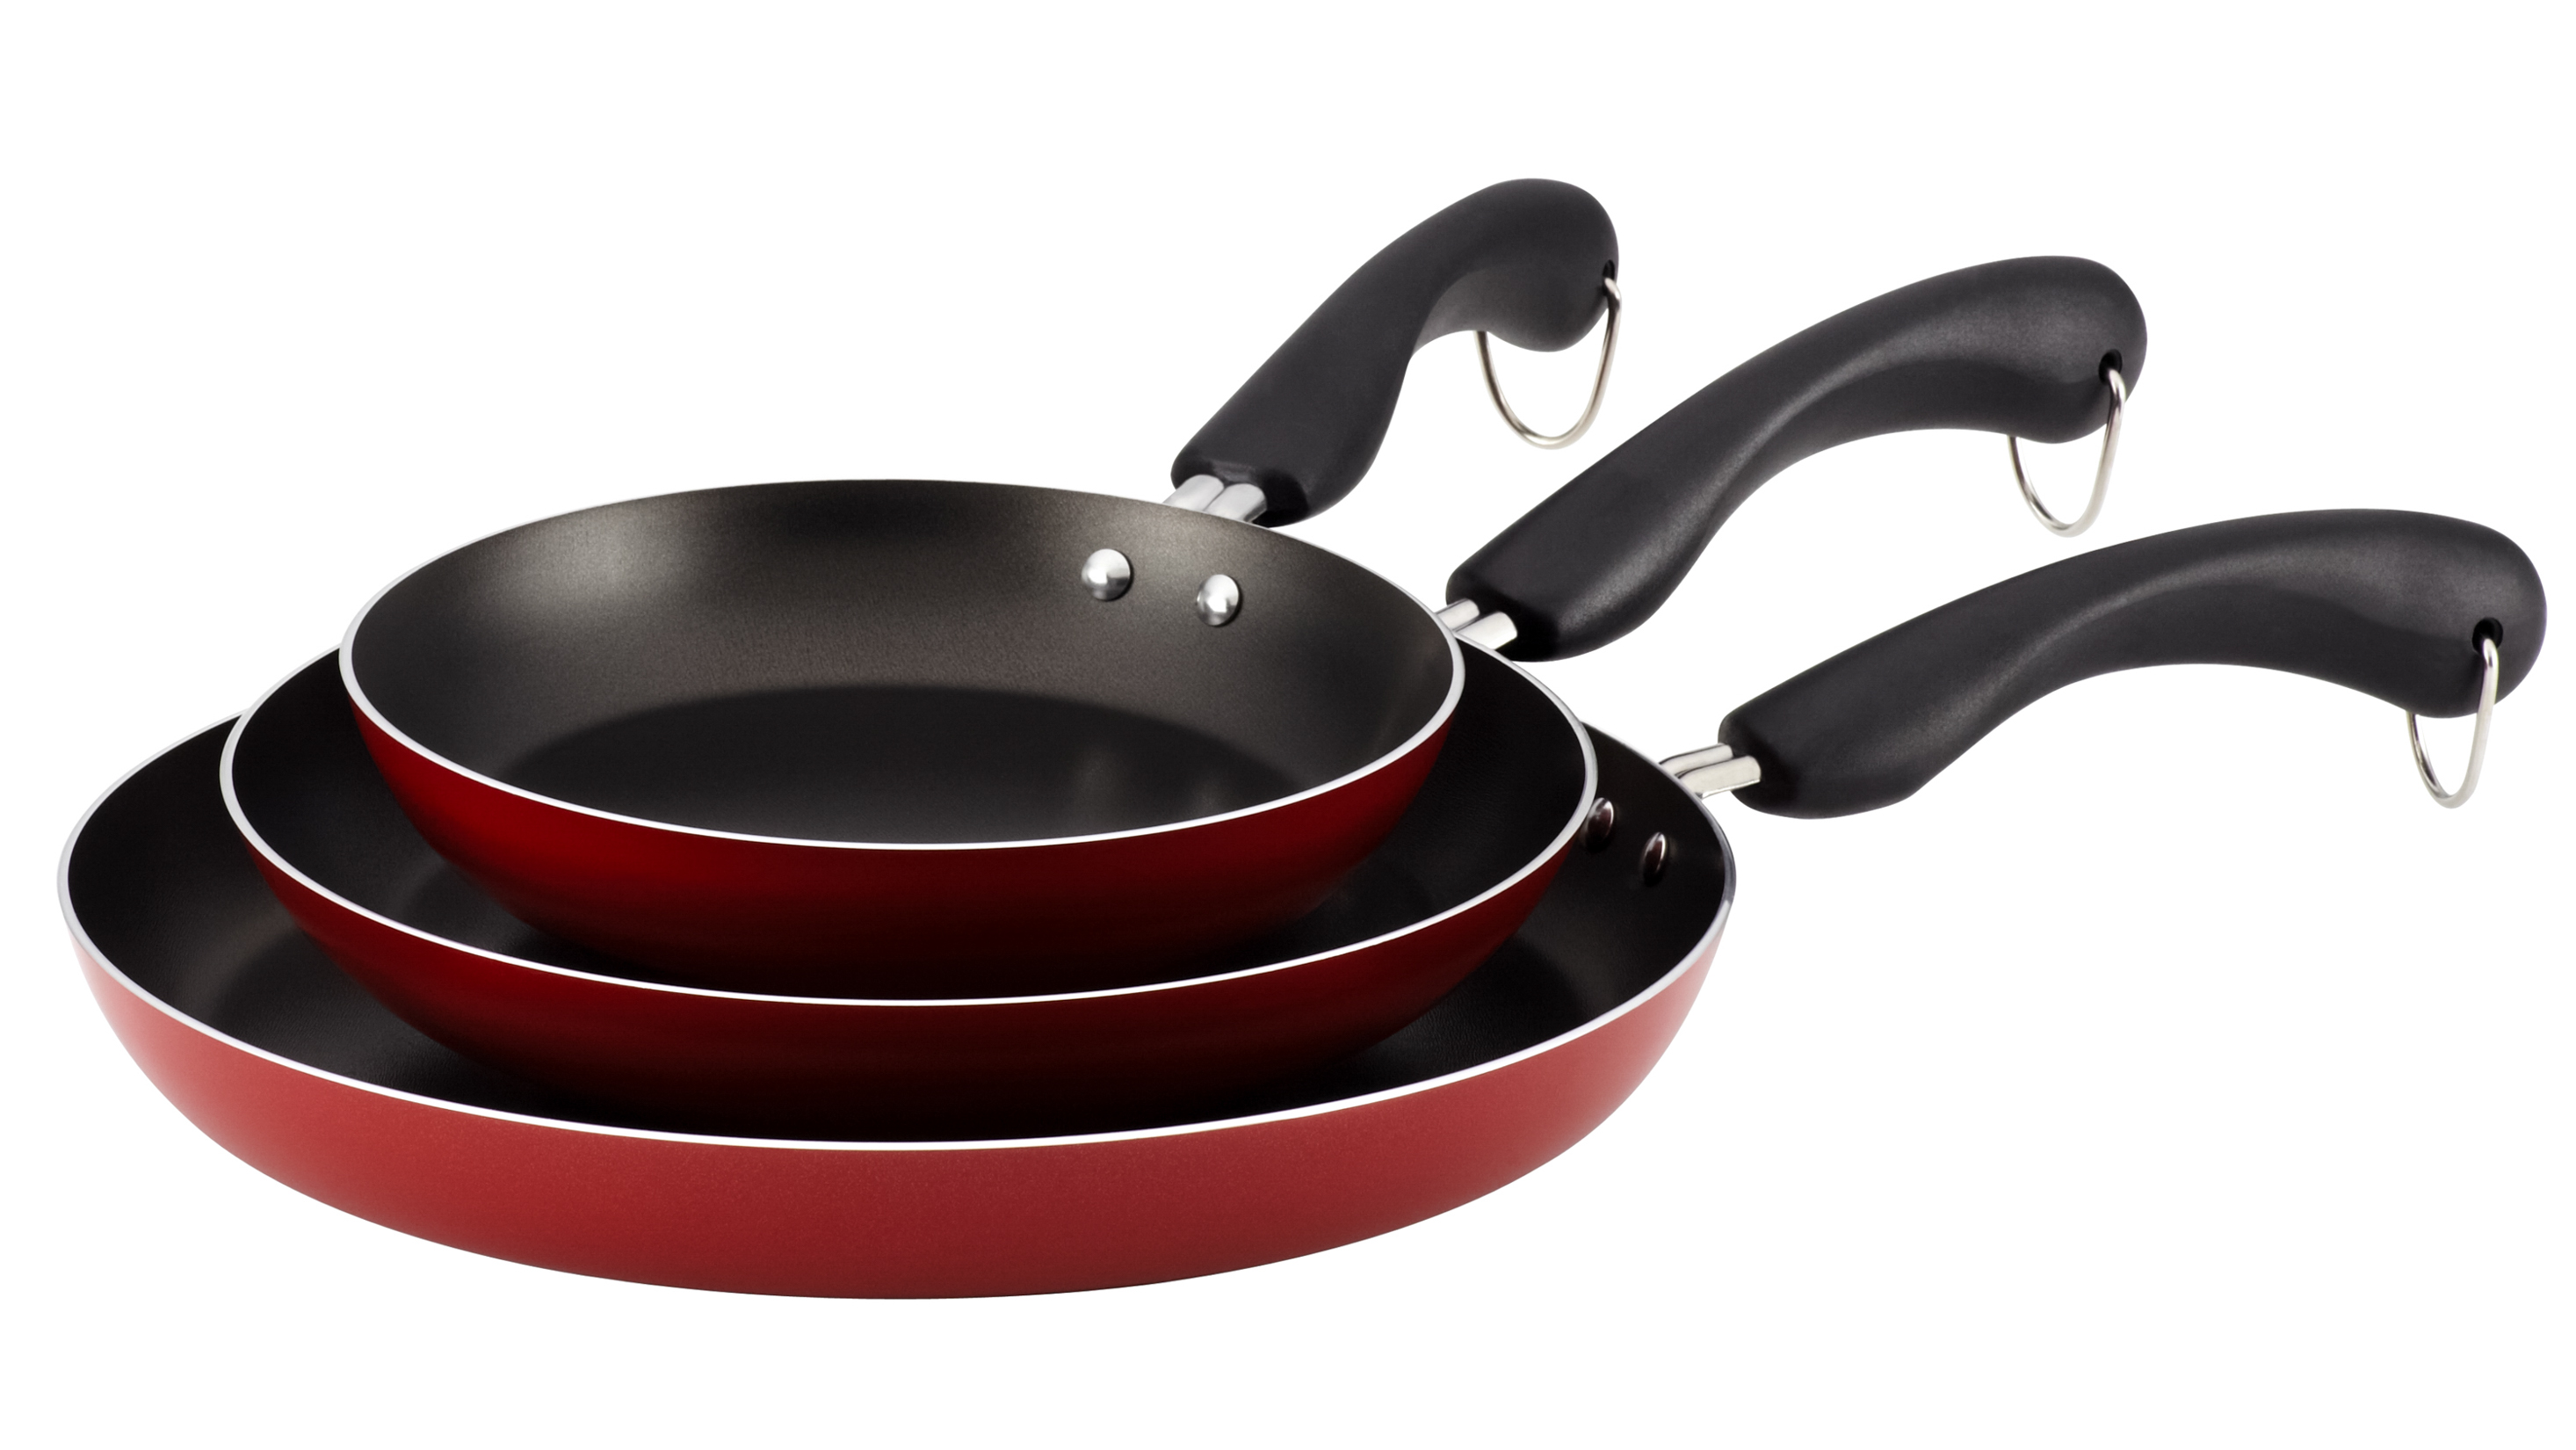 Healthy Cookware: Non-Stick Teflon Coated Cookware Is The Least Safe